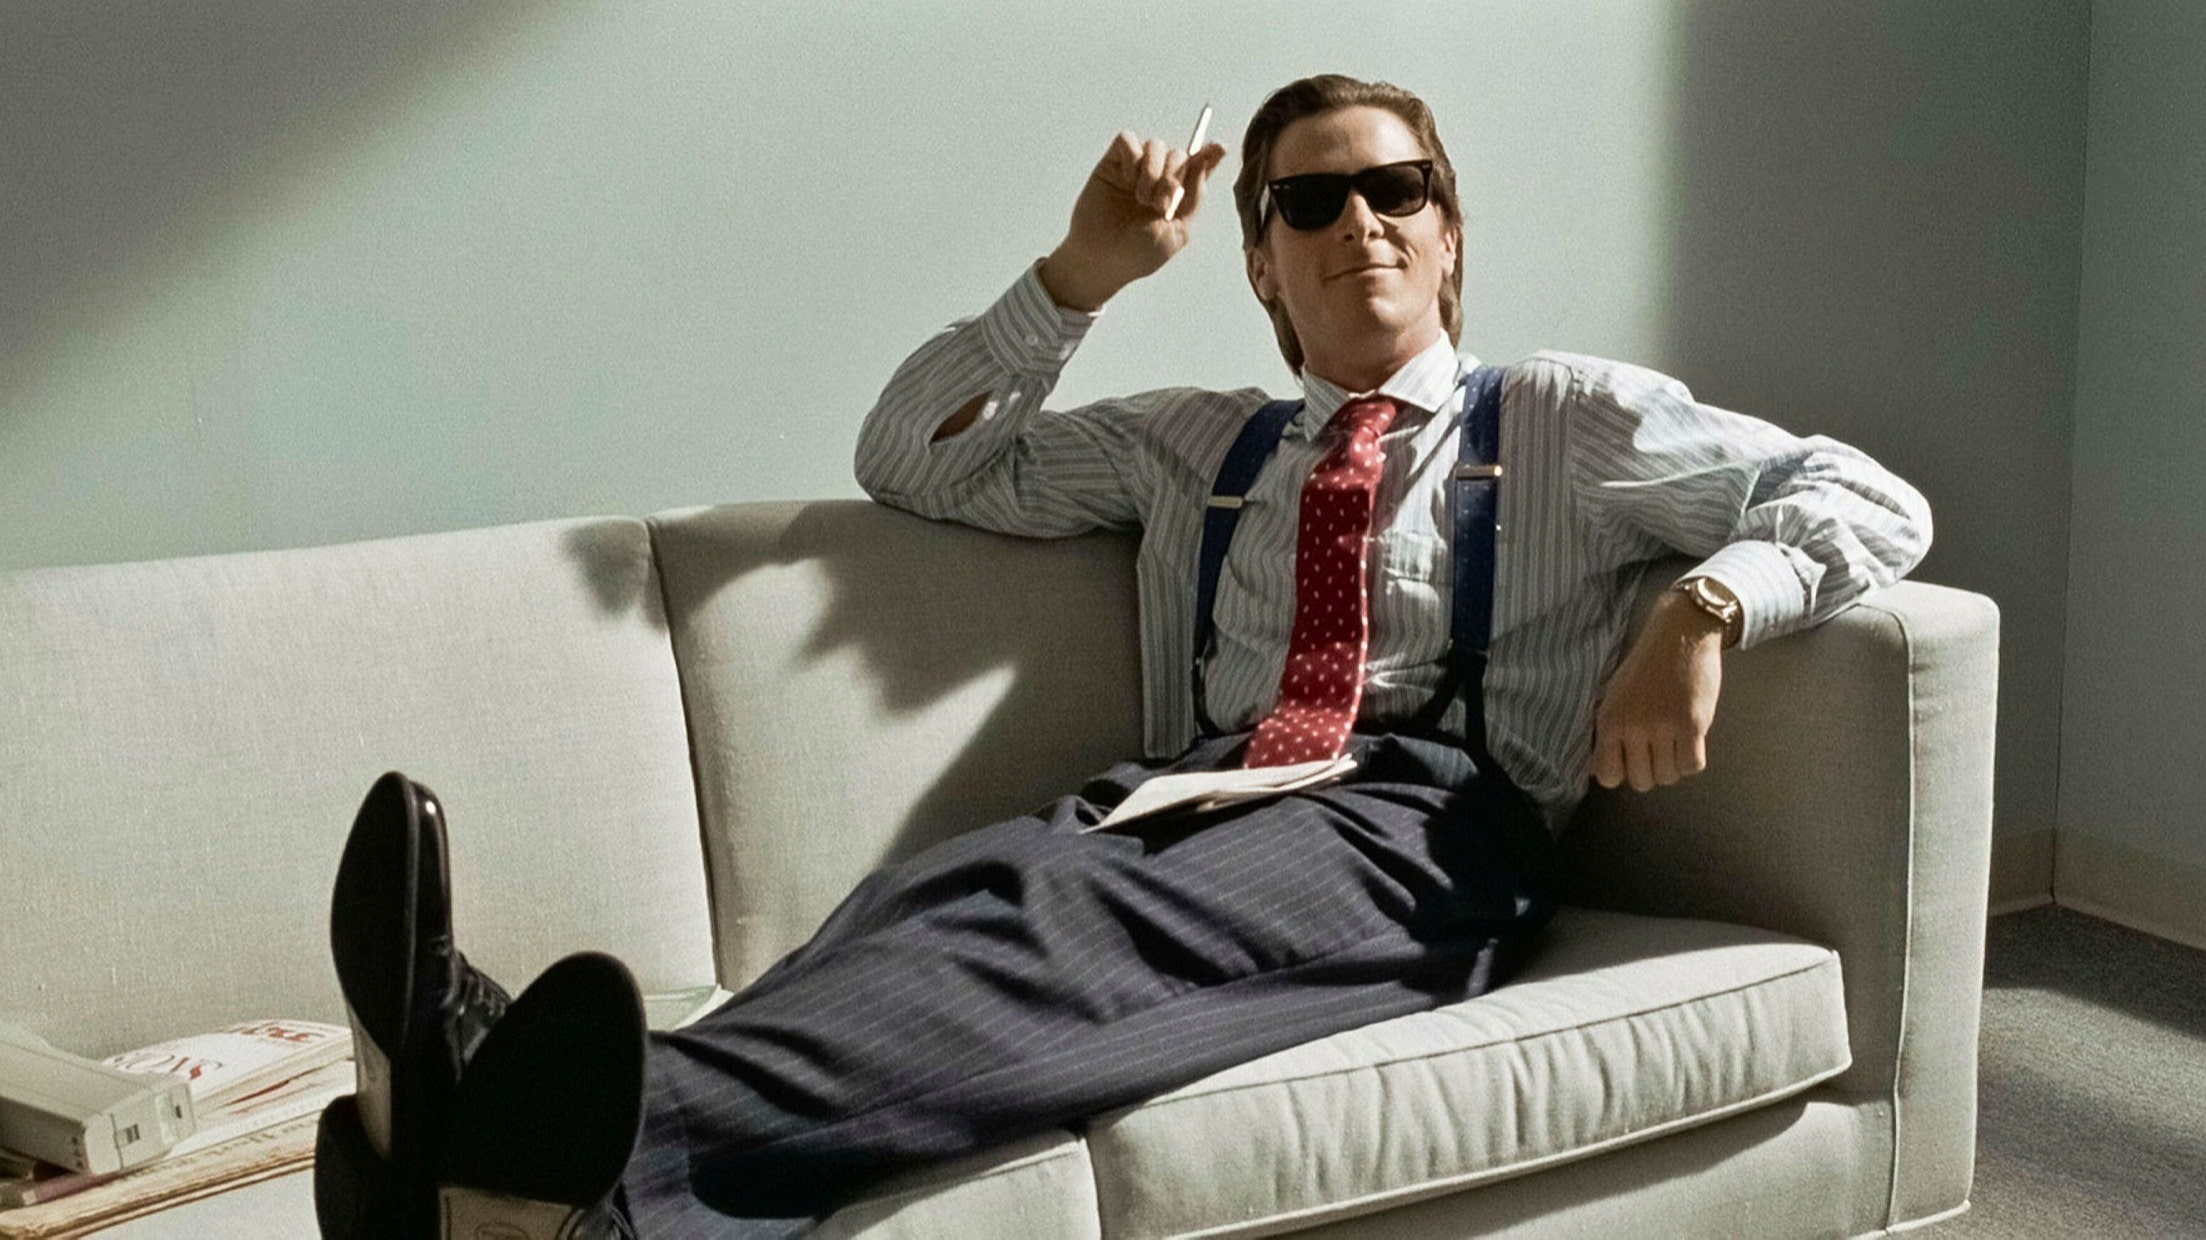 CIGARS IN CINEMA AMERICAN PSYCHO (2000) By Justin Bower